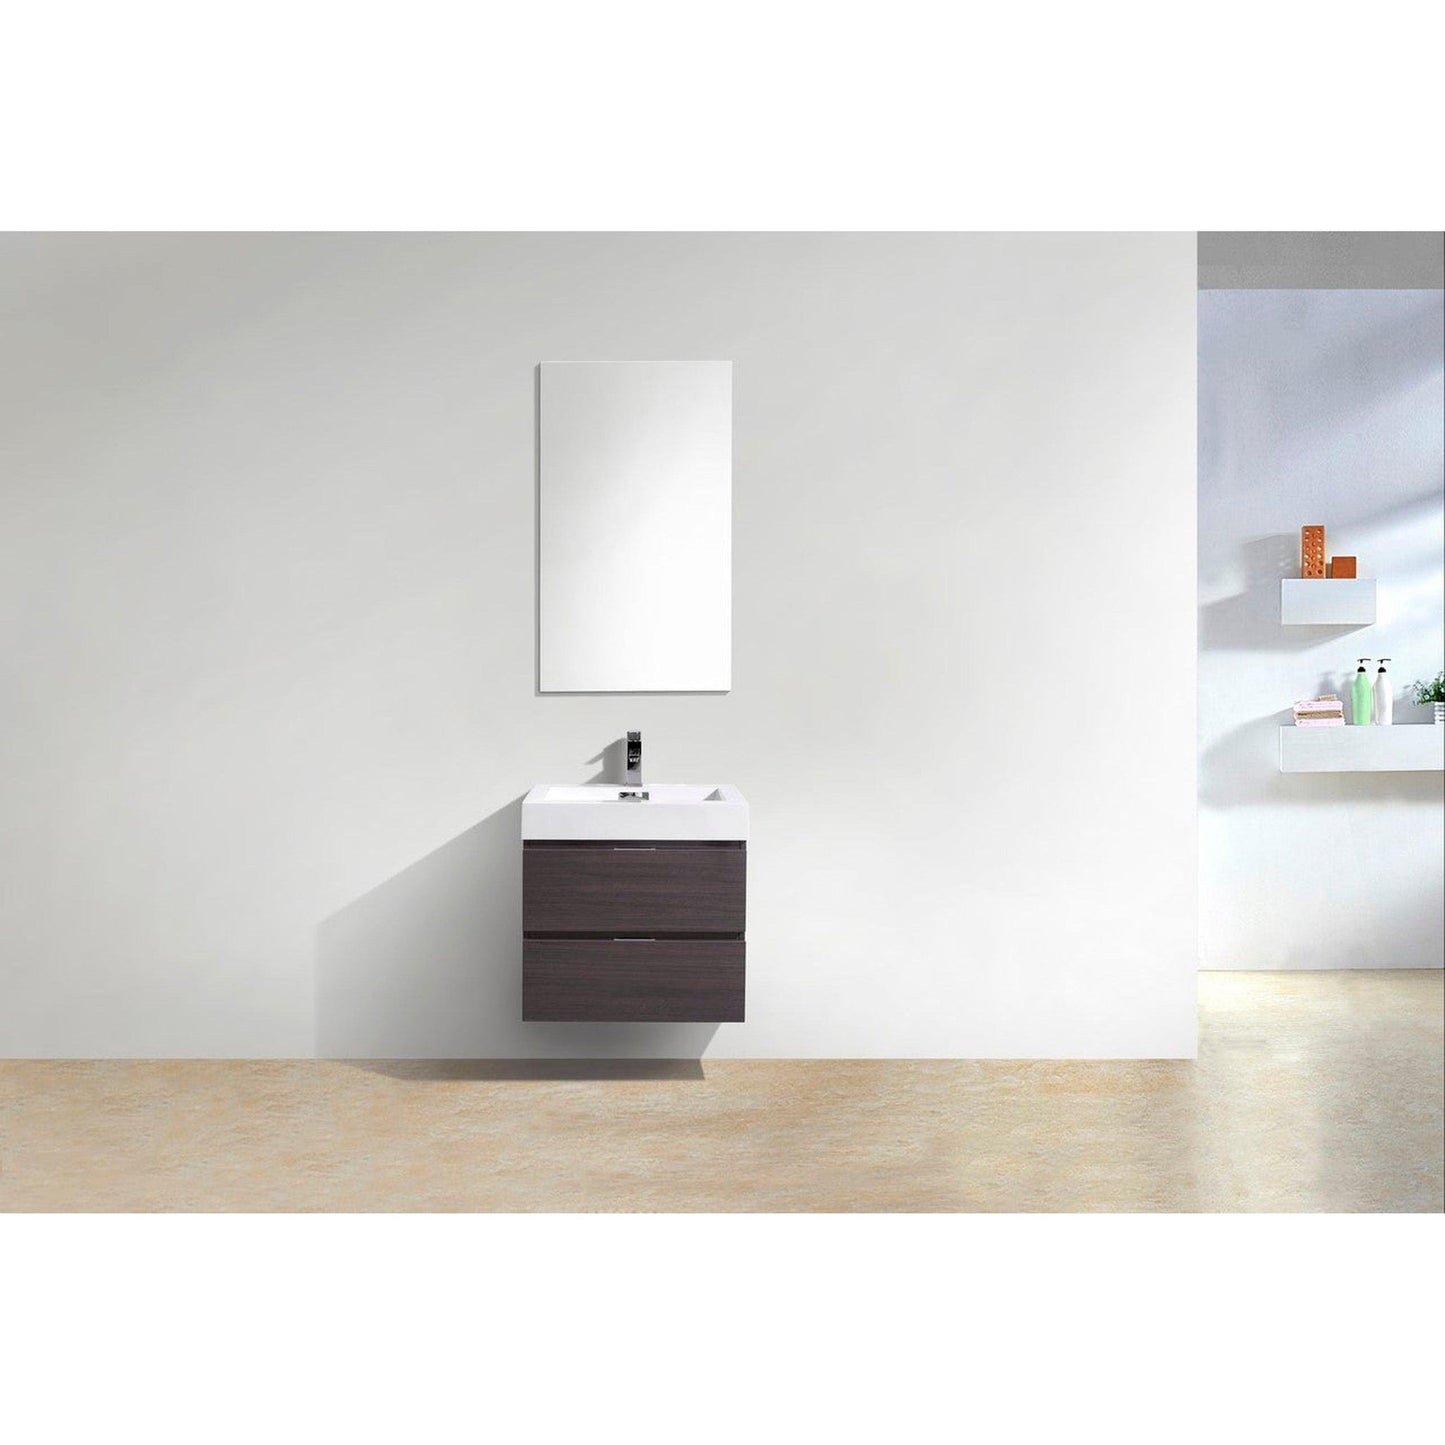 KubeBath Bliss 24" High Gloss Gray Oak Wall-Mounted Modern Bathroom Vanity With Single Integrated Acrylic Sink With Overflow and 22" Wood Framed Mirror With Shelf